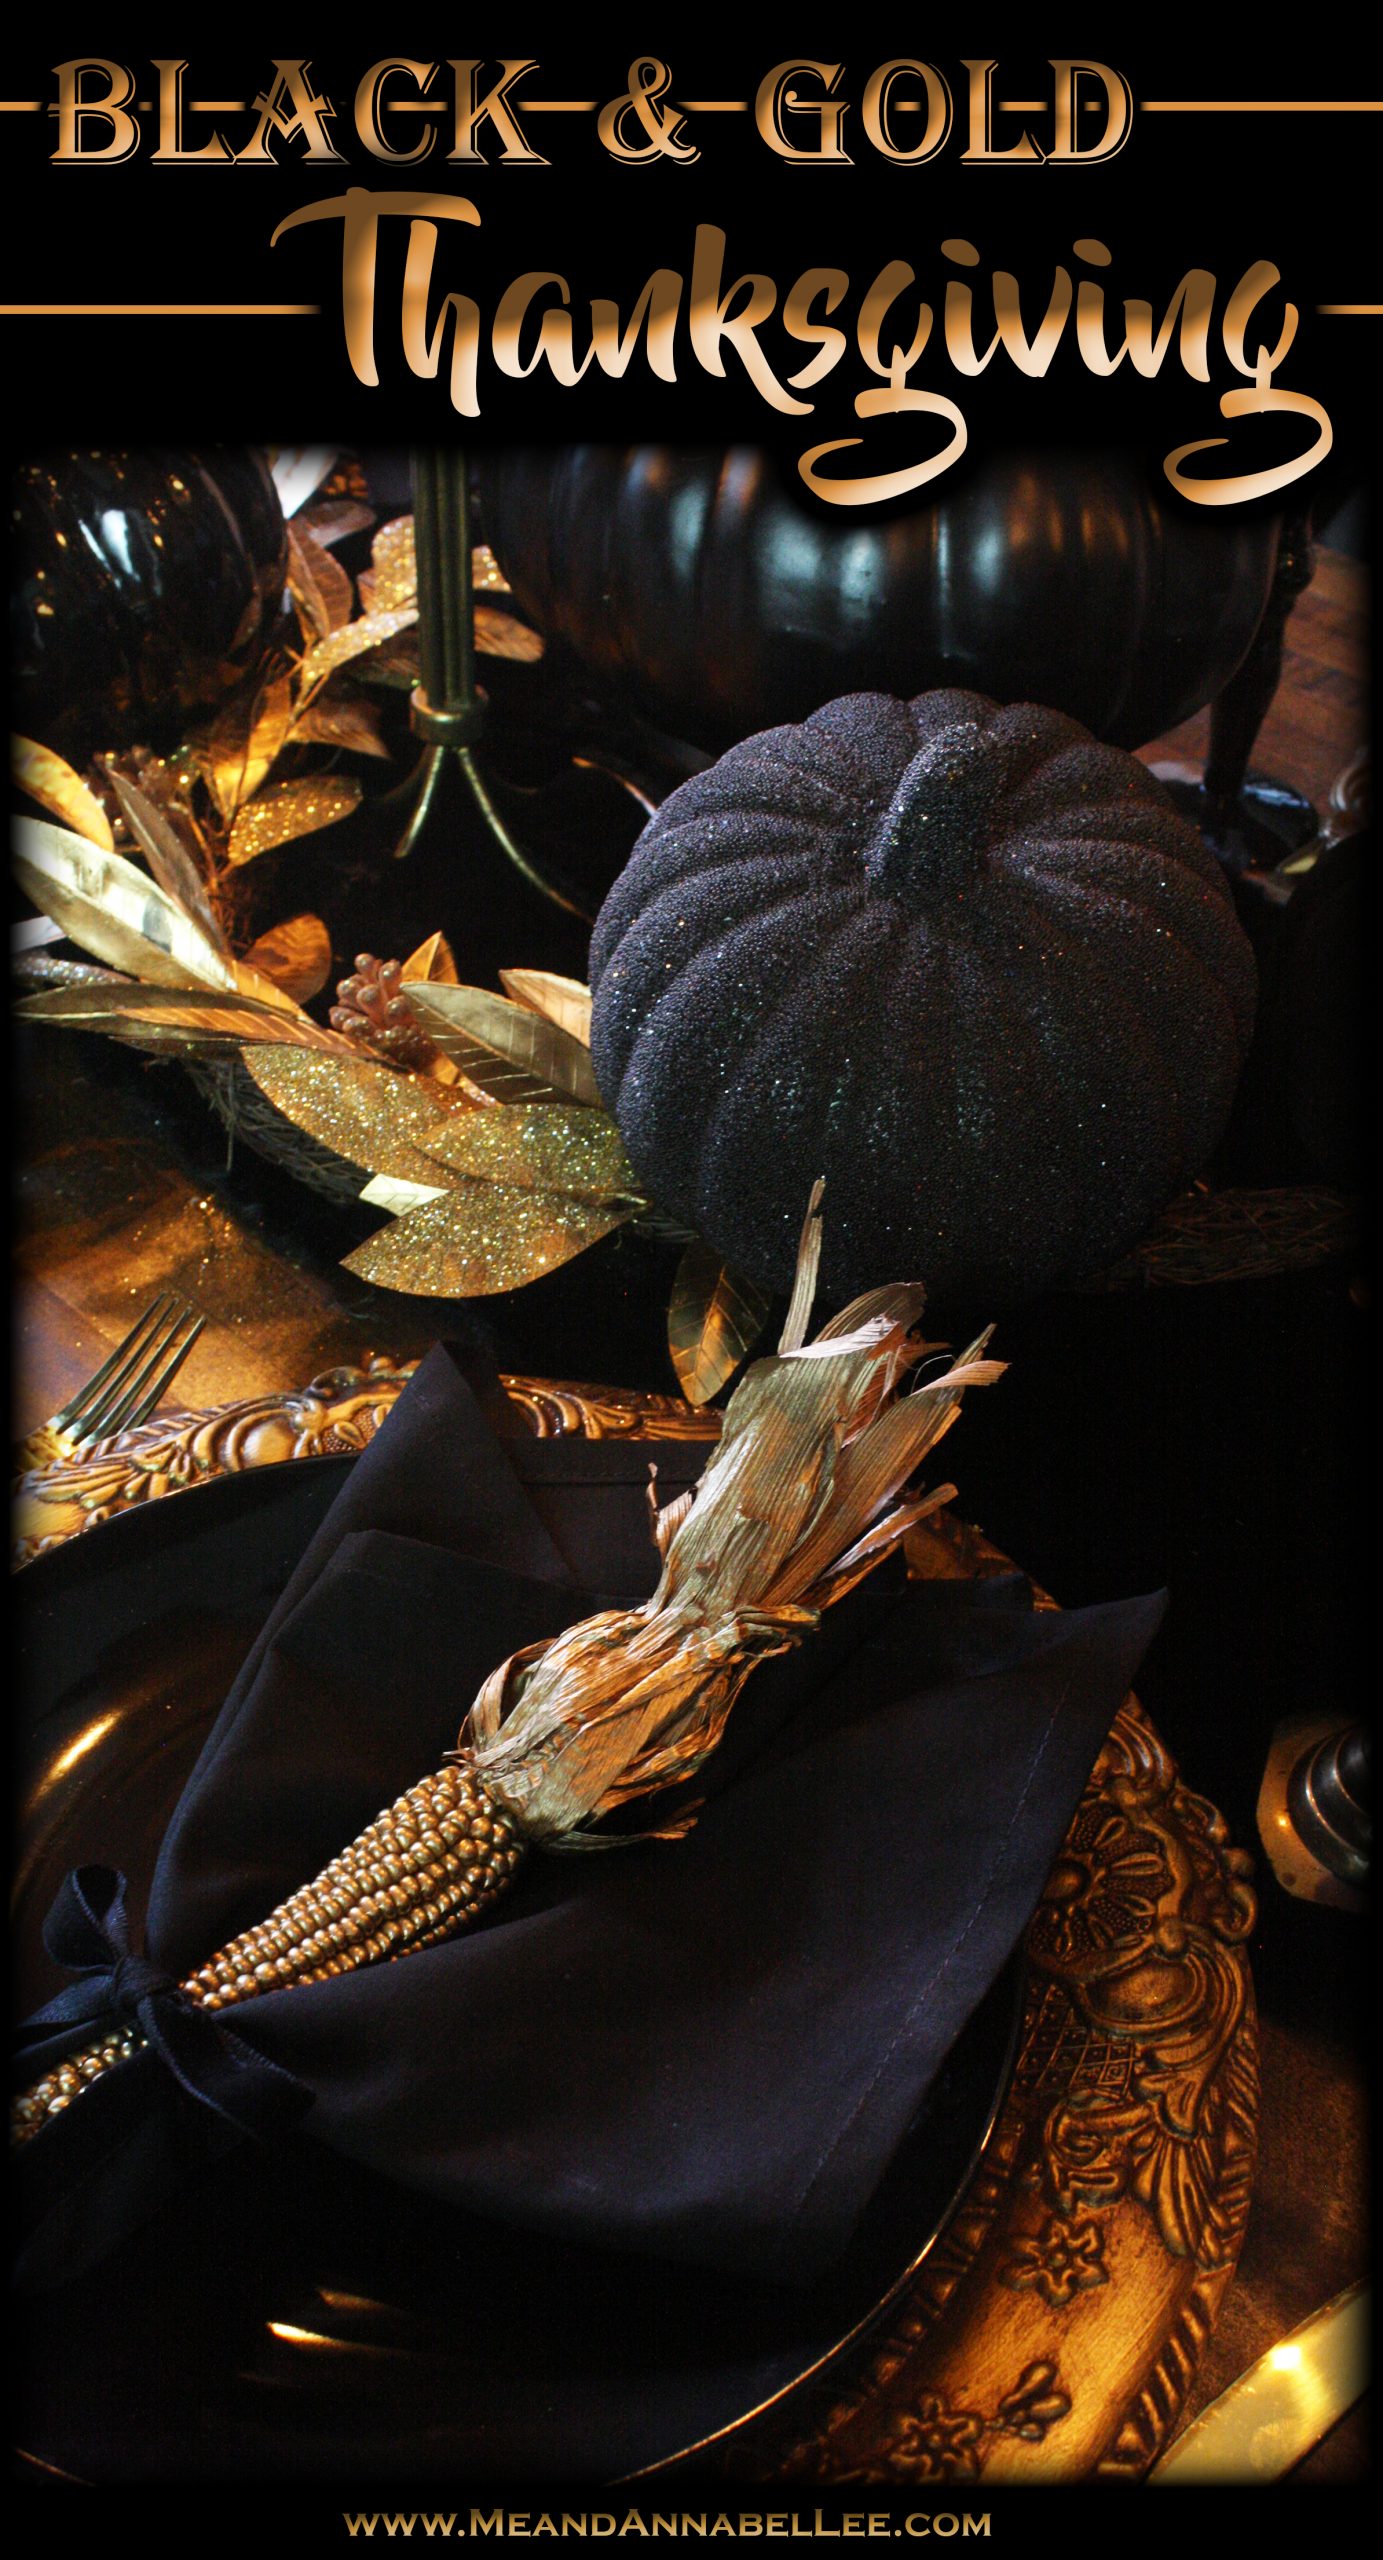 How to create a haunting yet elegant Fall Table for your Thanksgiving Dinner Party… A mix of black velvet, faux fur, antique gold, black candles, candelabras, black pumpkins and gilded in gold touches of Fall to create this Black and Gold Gothic Thanksgiving Table design | Me and Annabel Lee Blog